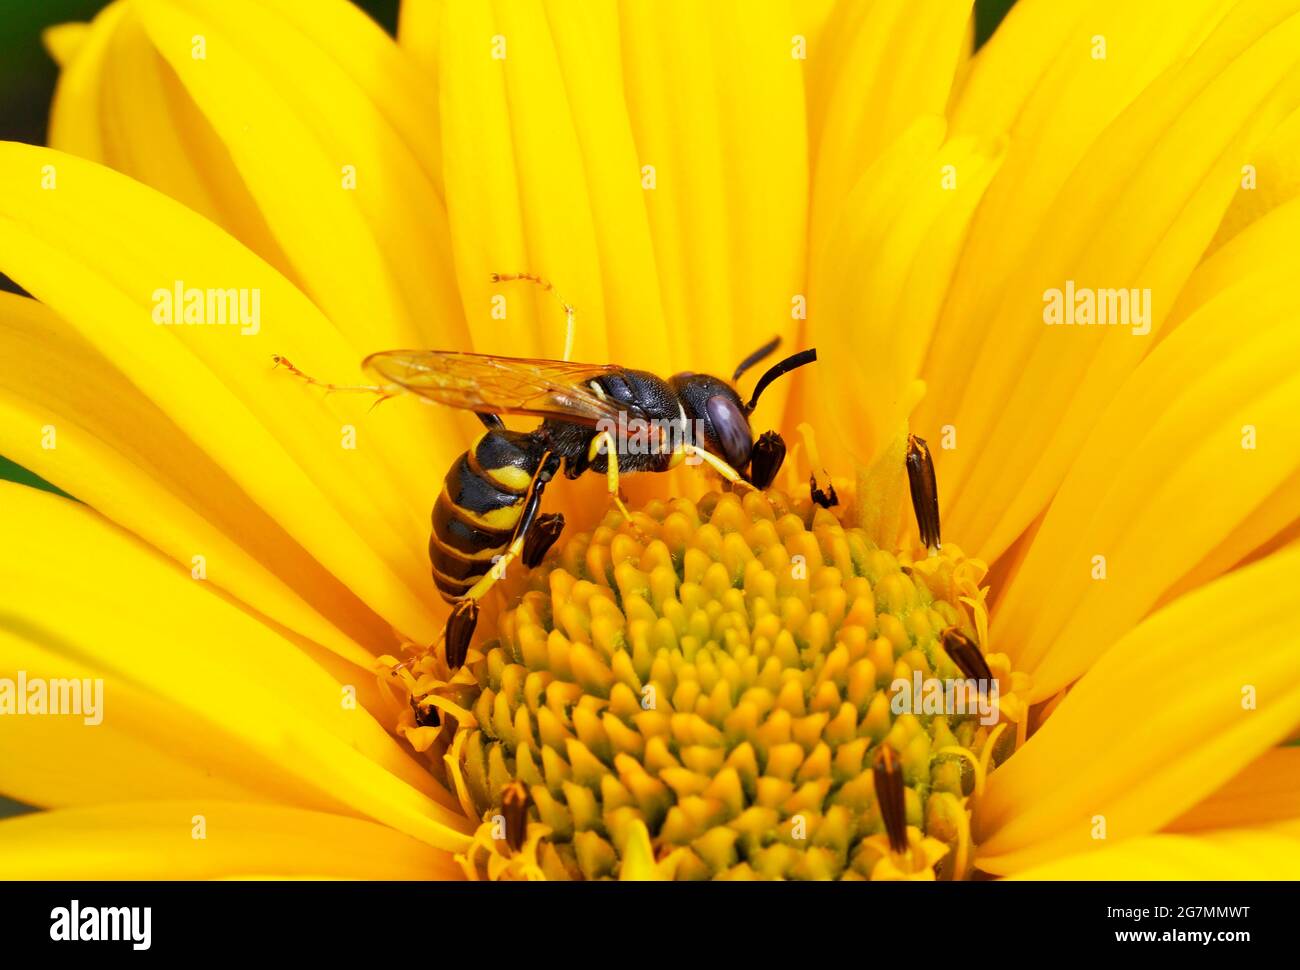 A wasp collects nectar on a yellow flower. Insect close up in a natural setting. Stock Photo